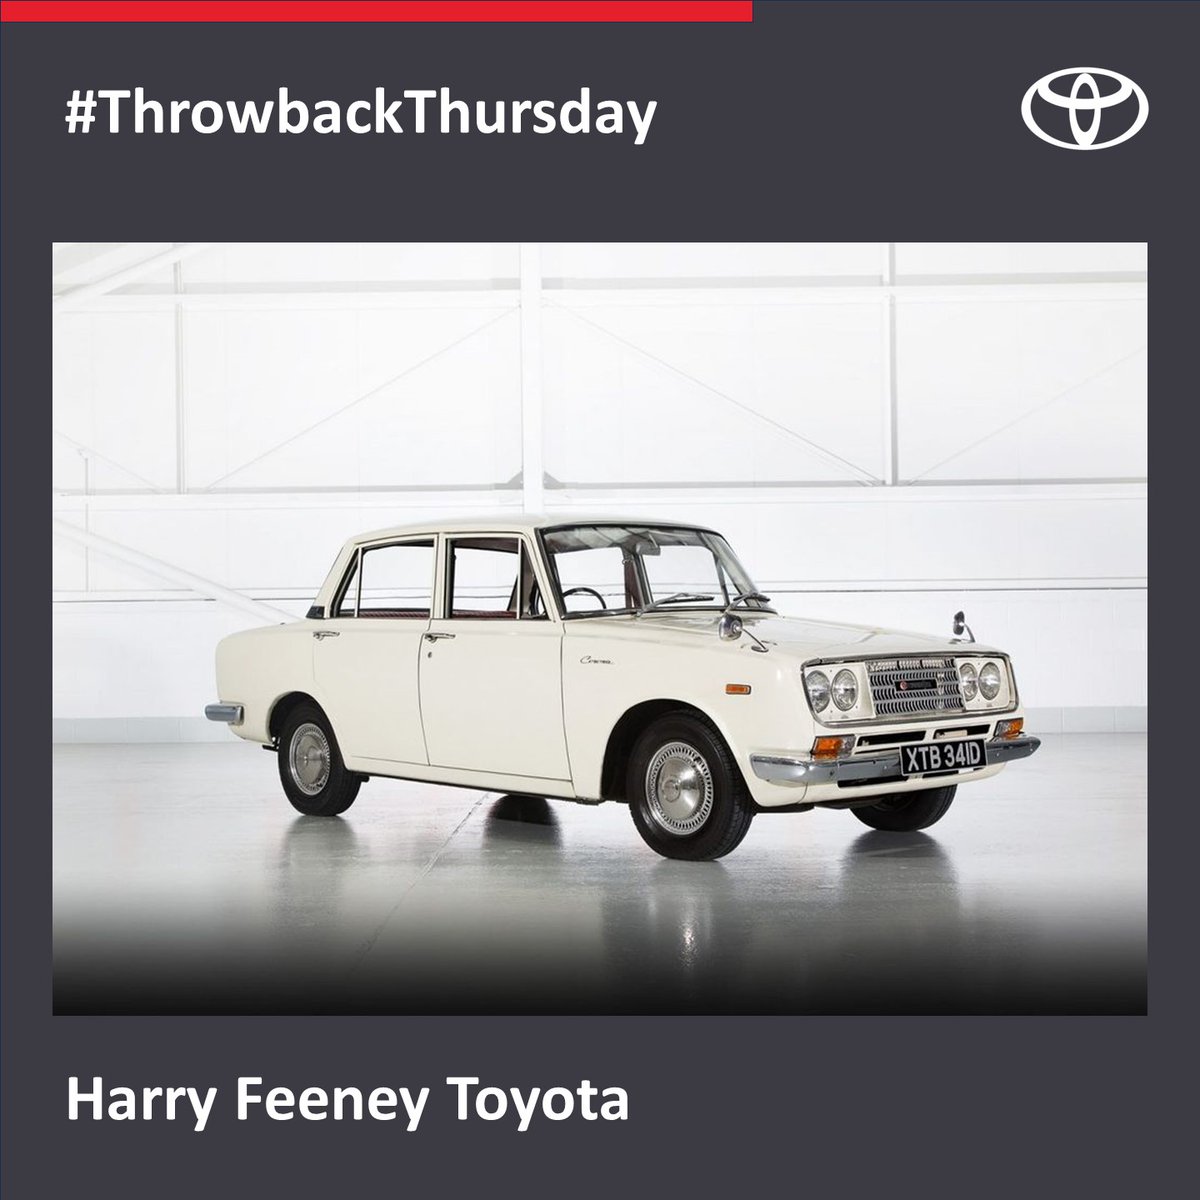 #TBT
Since its arrival into the UK Market in 1965 which was marked by a four car stand at that year’s motor show, Toyota have now sold more than 4,000,000 vehicles!
Only one vehicle was on the stand – can you name it 🤔
#HarryFeeney #Toyota #Blackpool #Heritage #Cars